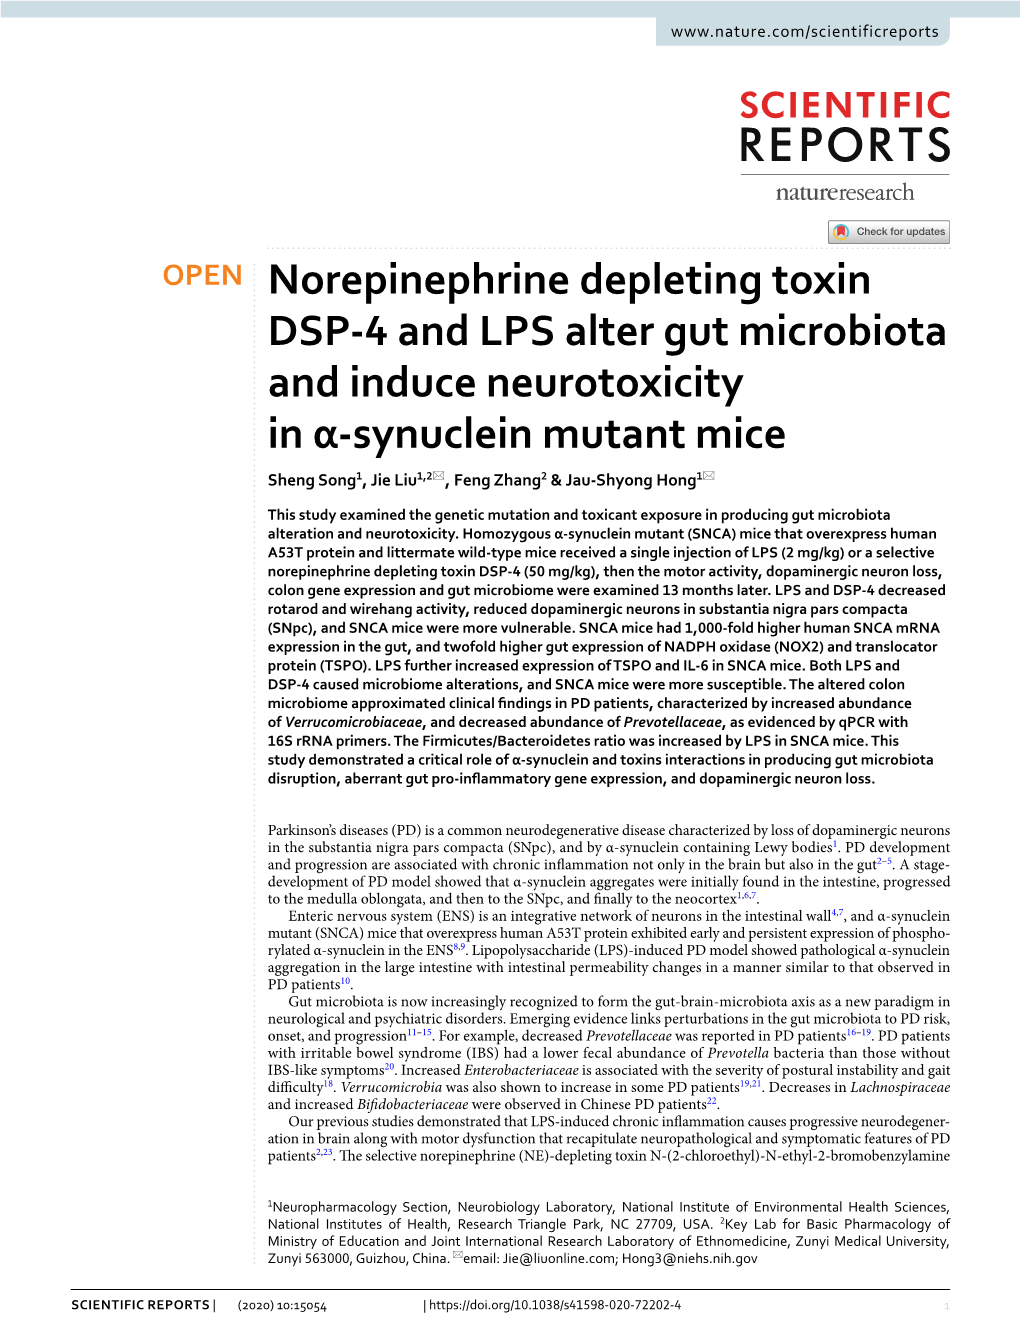 Norepinephrine Depleting Toxin DSP-4 and LPS Alter Gut Microbiota